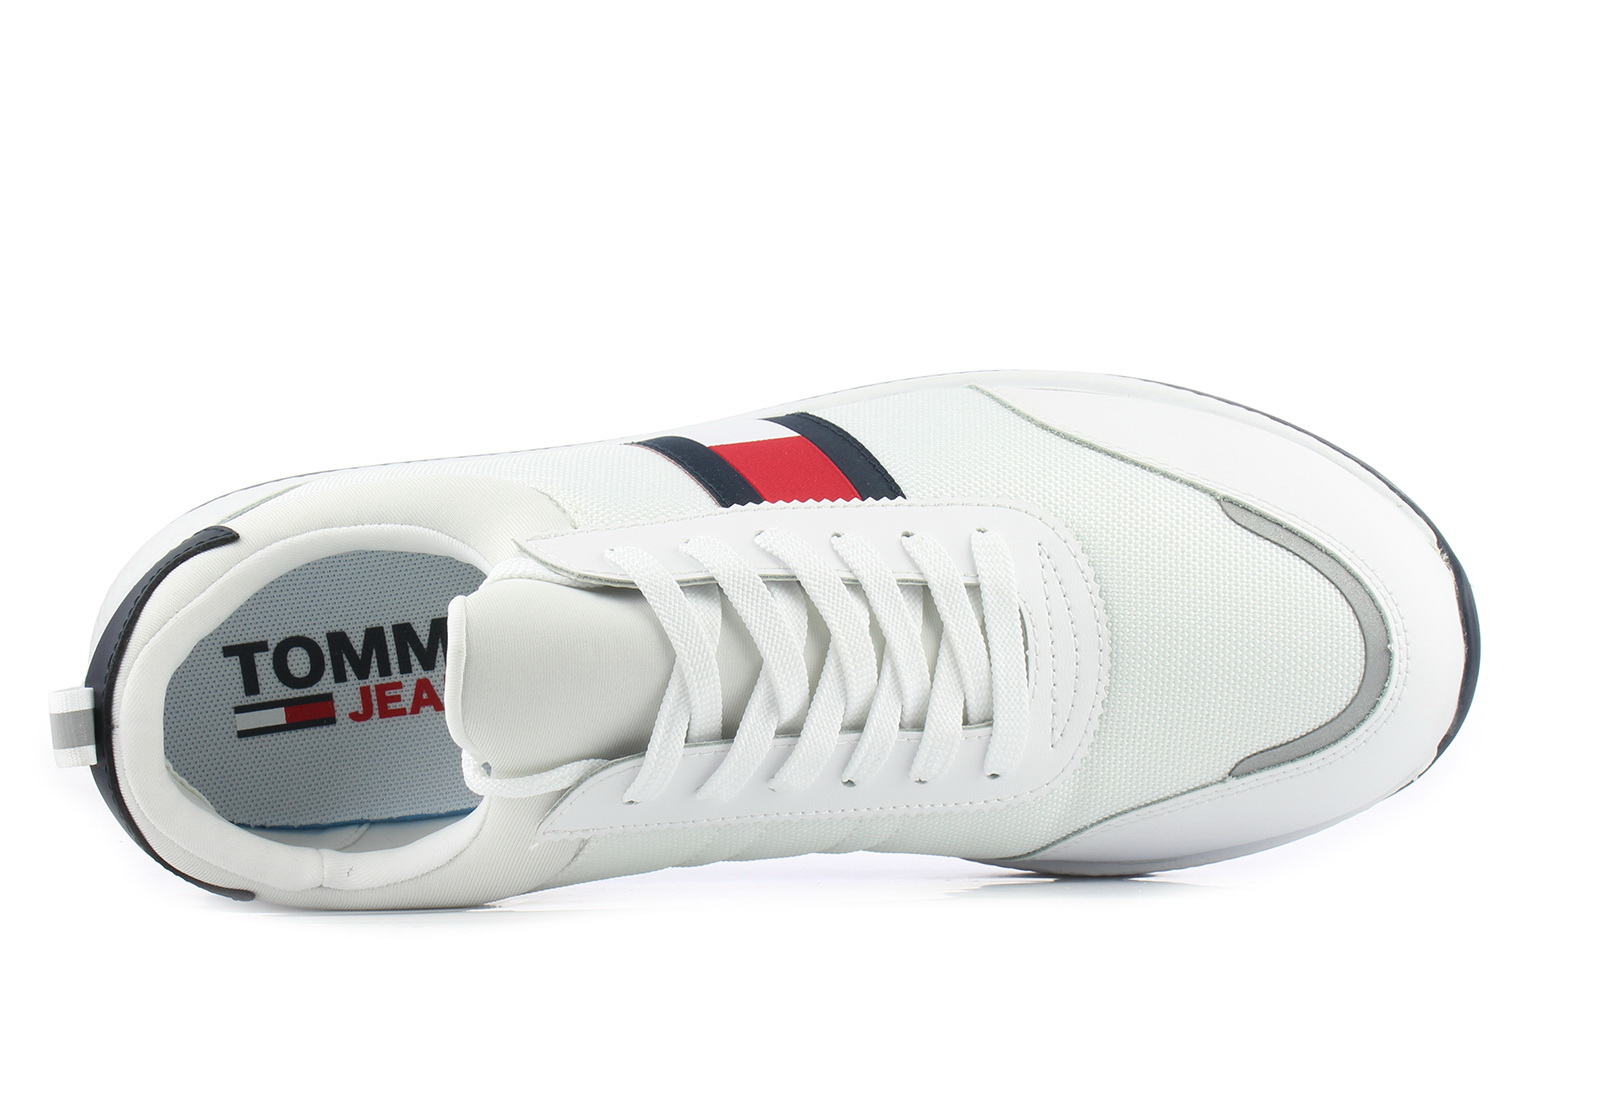 Tommy Hilfiger Sneakers - Blake 15c - - Online shop for sneakers, shoes boots